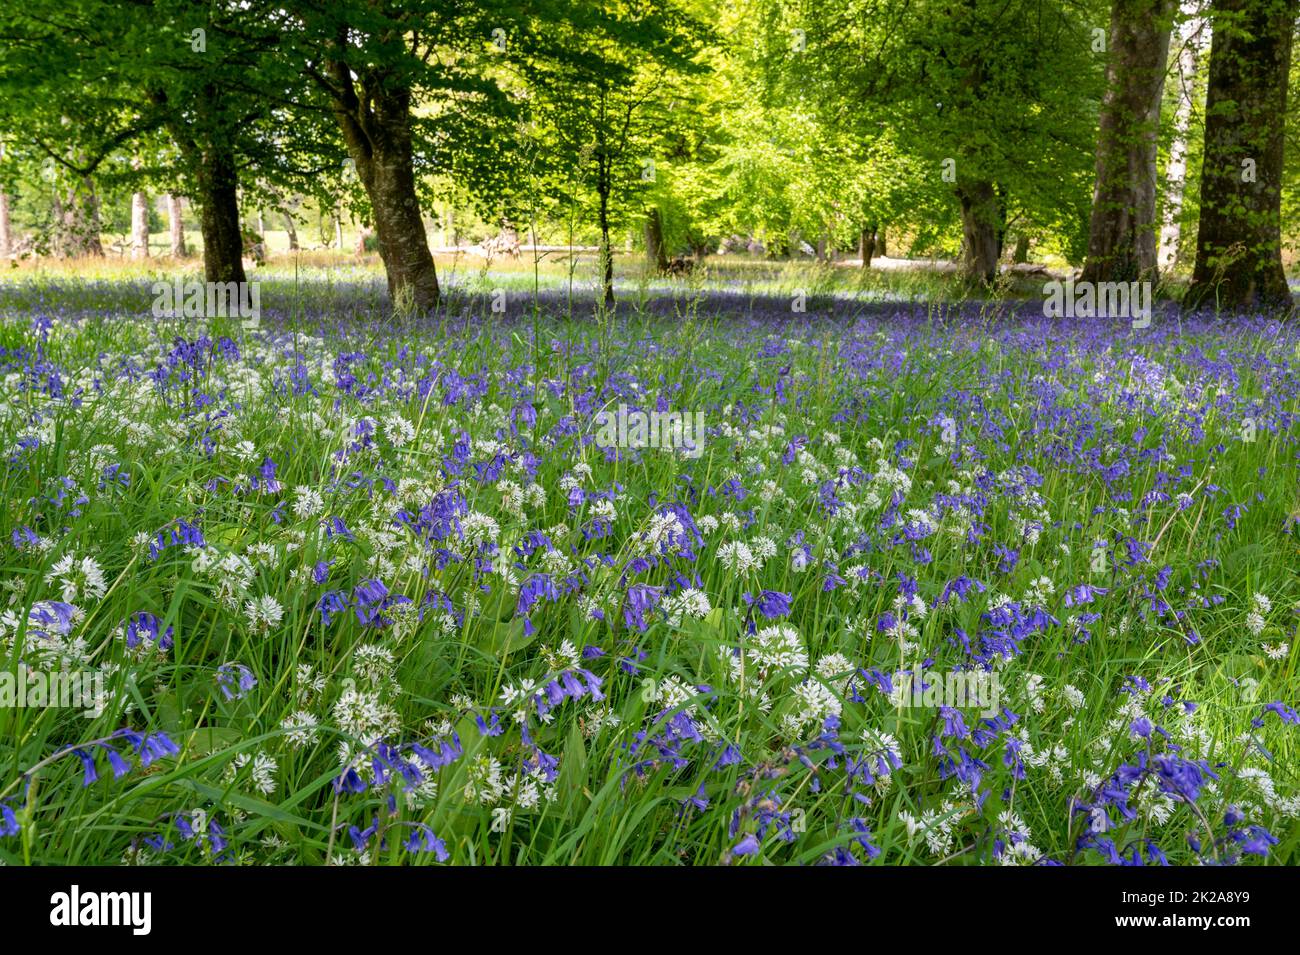 Swathes of blue and white bluebells and wild garlic at Pencarrow House estate, Cornwall UK. Stock Photo